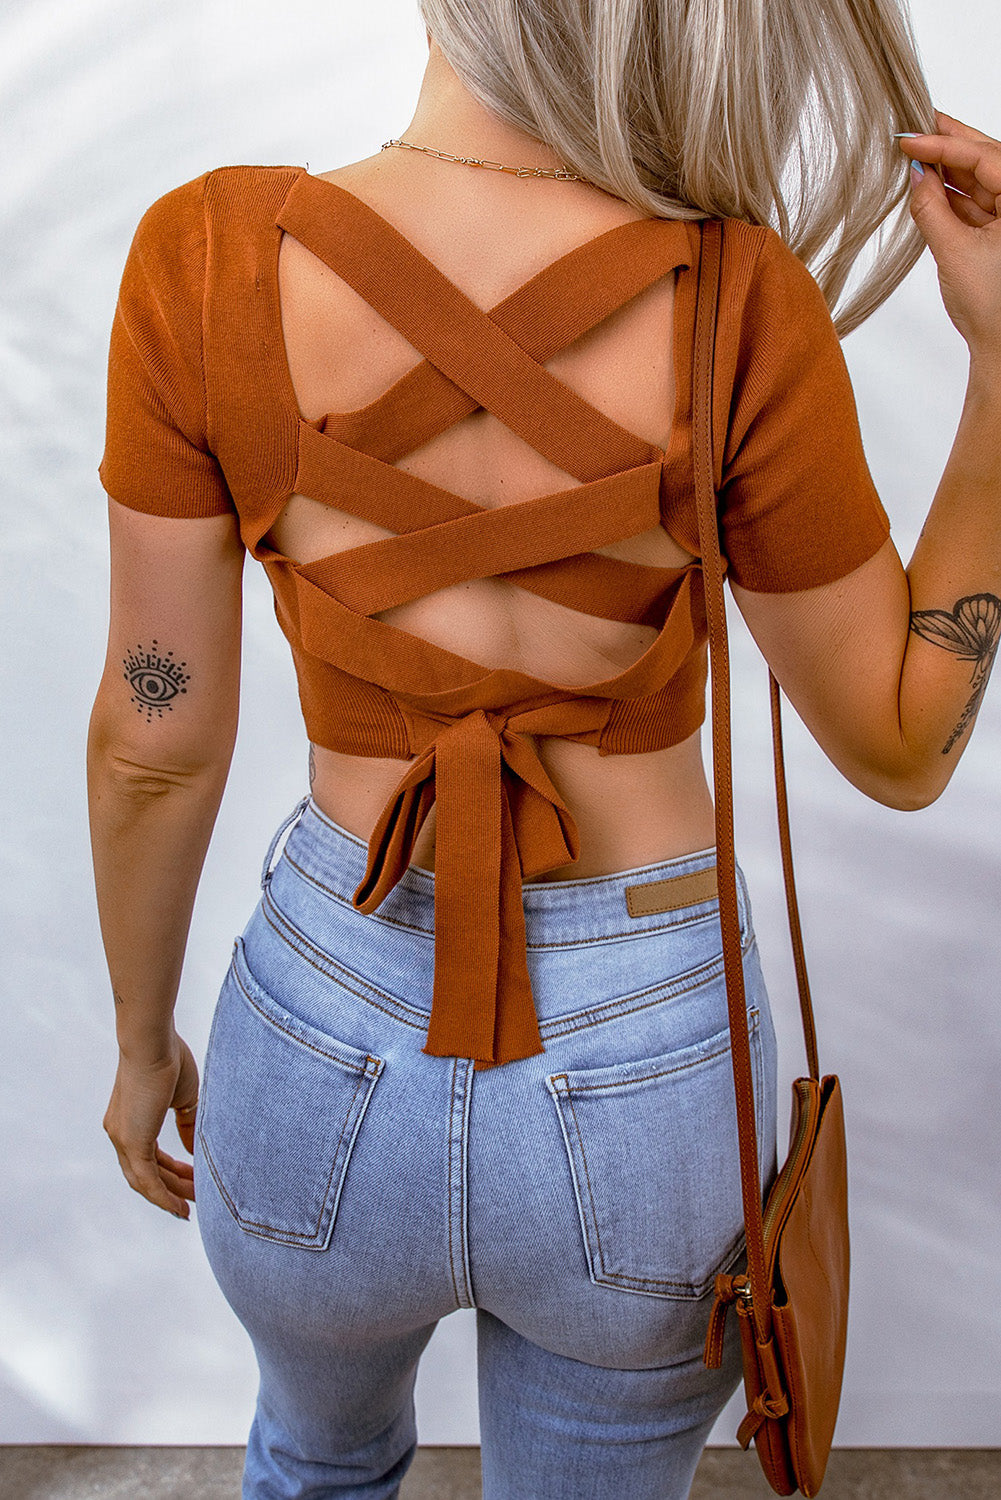 Lace-Up Square Neck Crop Top - Women’s Clothing & Accessories - Shirts & Tops - 6 - 2024